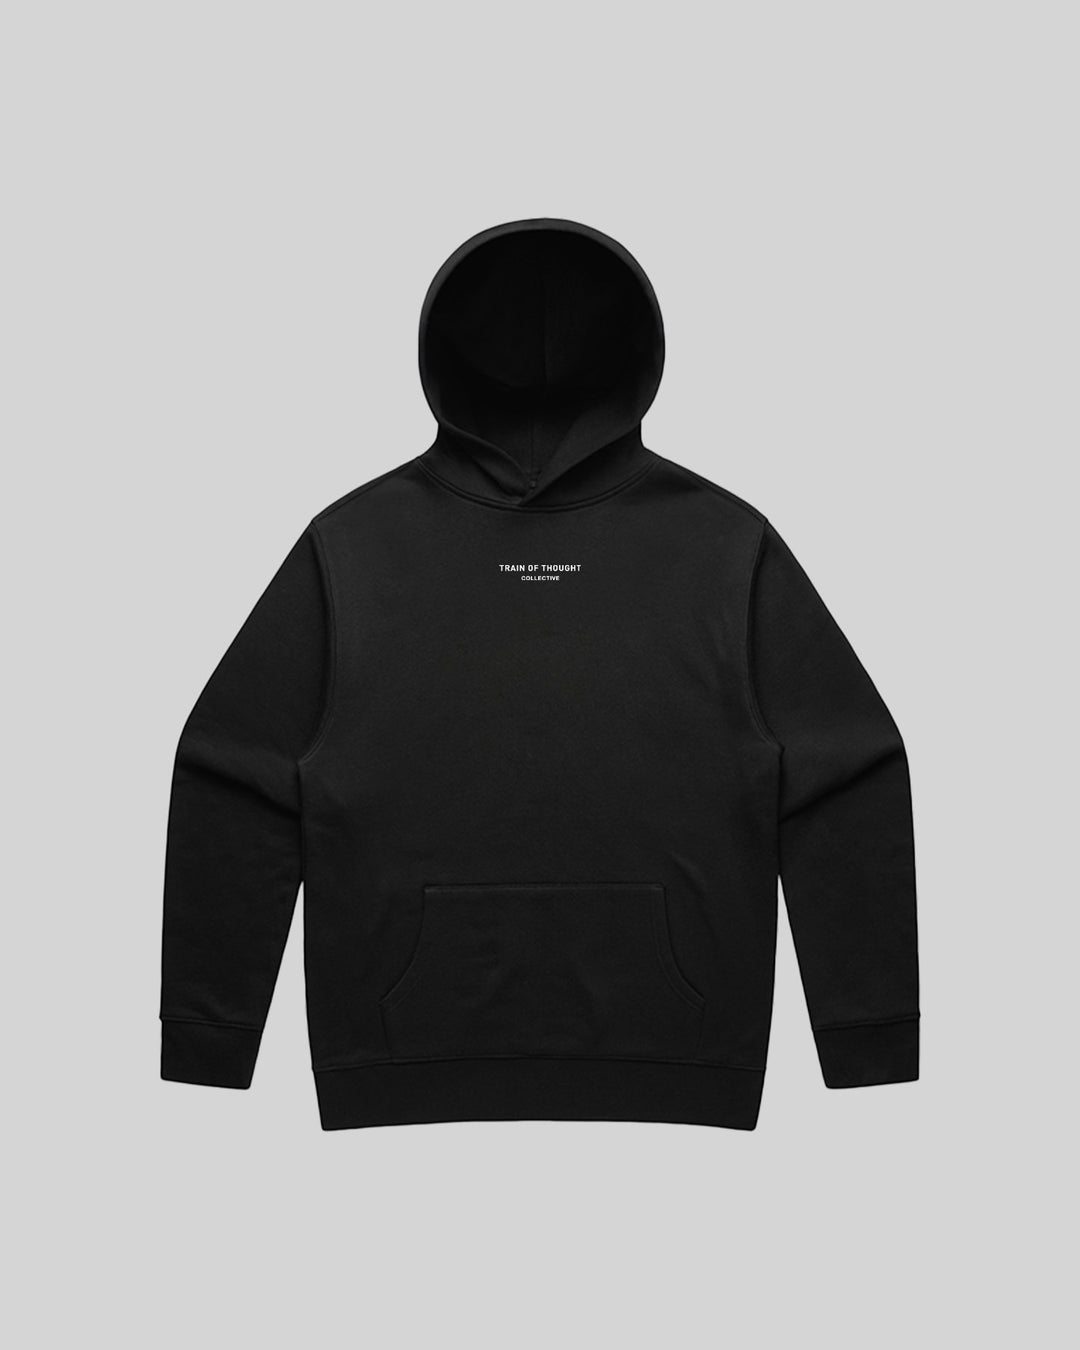 Blackout Hoodie - trainofthoughtcollective